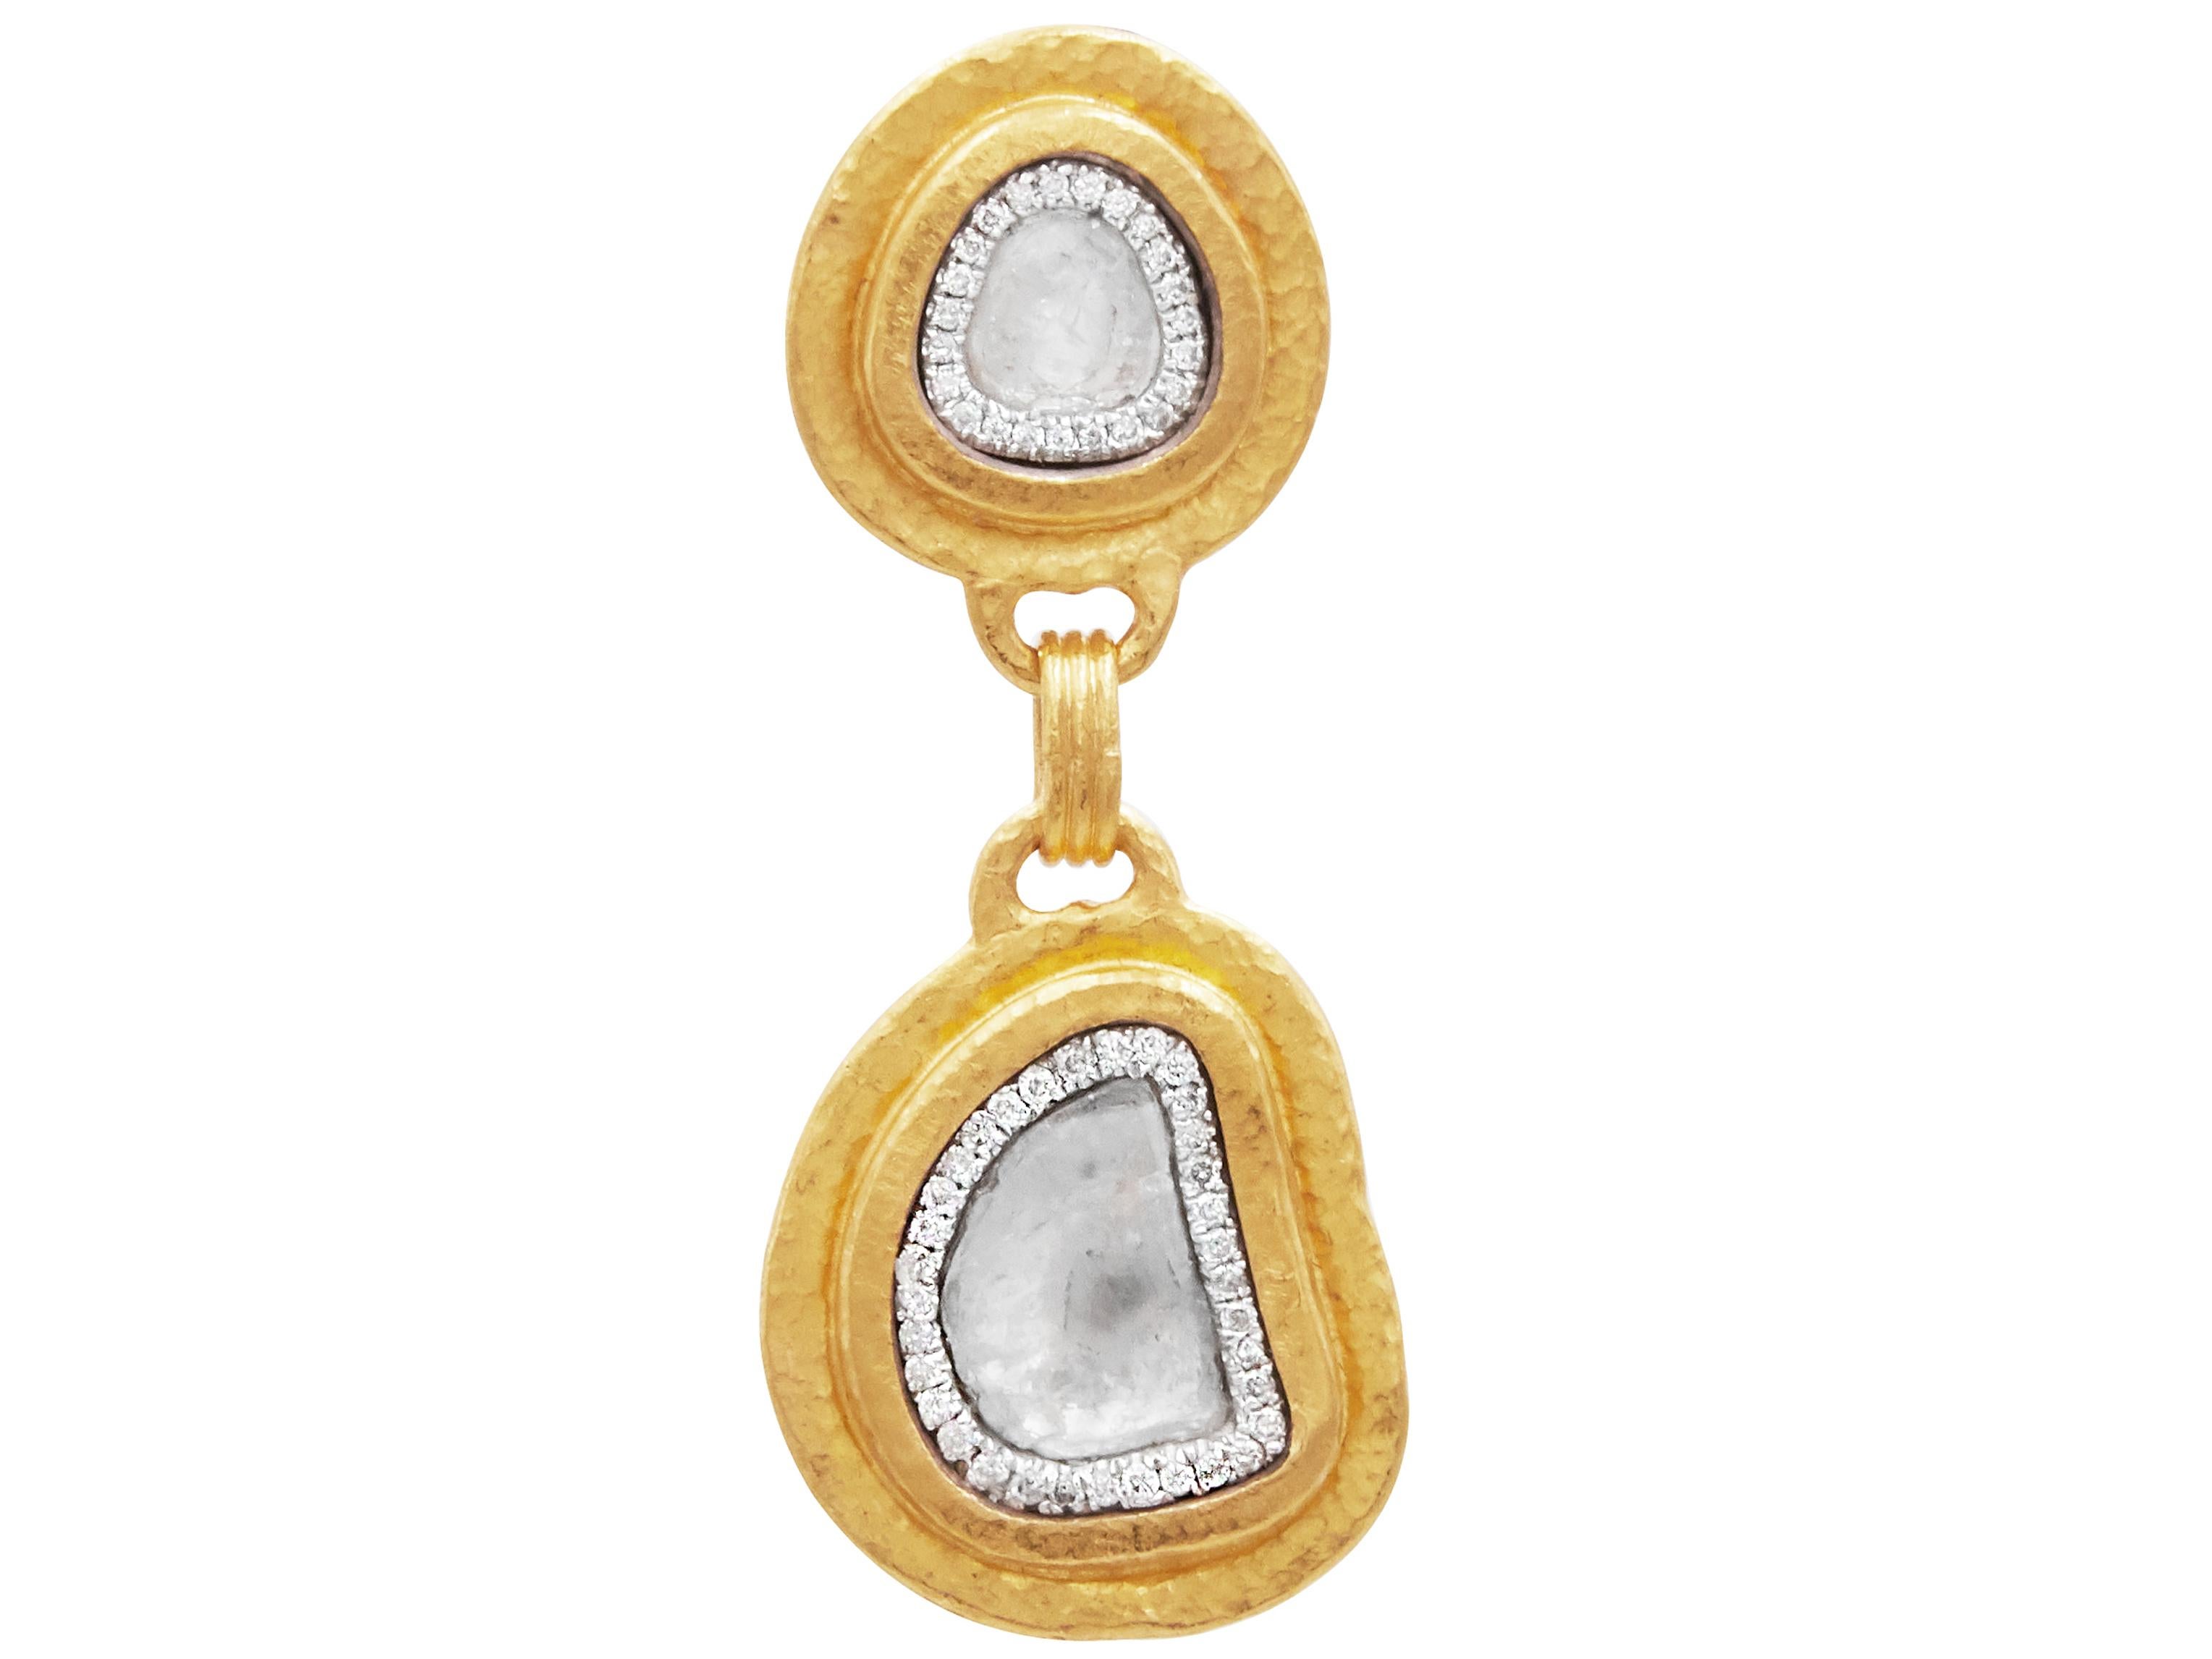 GURHAN one-of-a-kind double drop 24 Karat hammered yellow gold clip post earrings featuring two diamond slices surrounded by white pave diamonds. 1.70